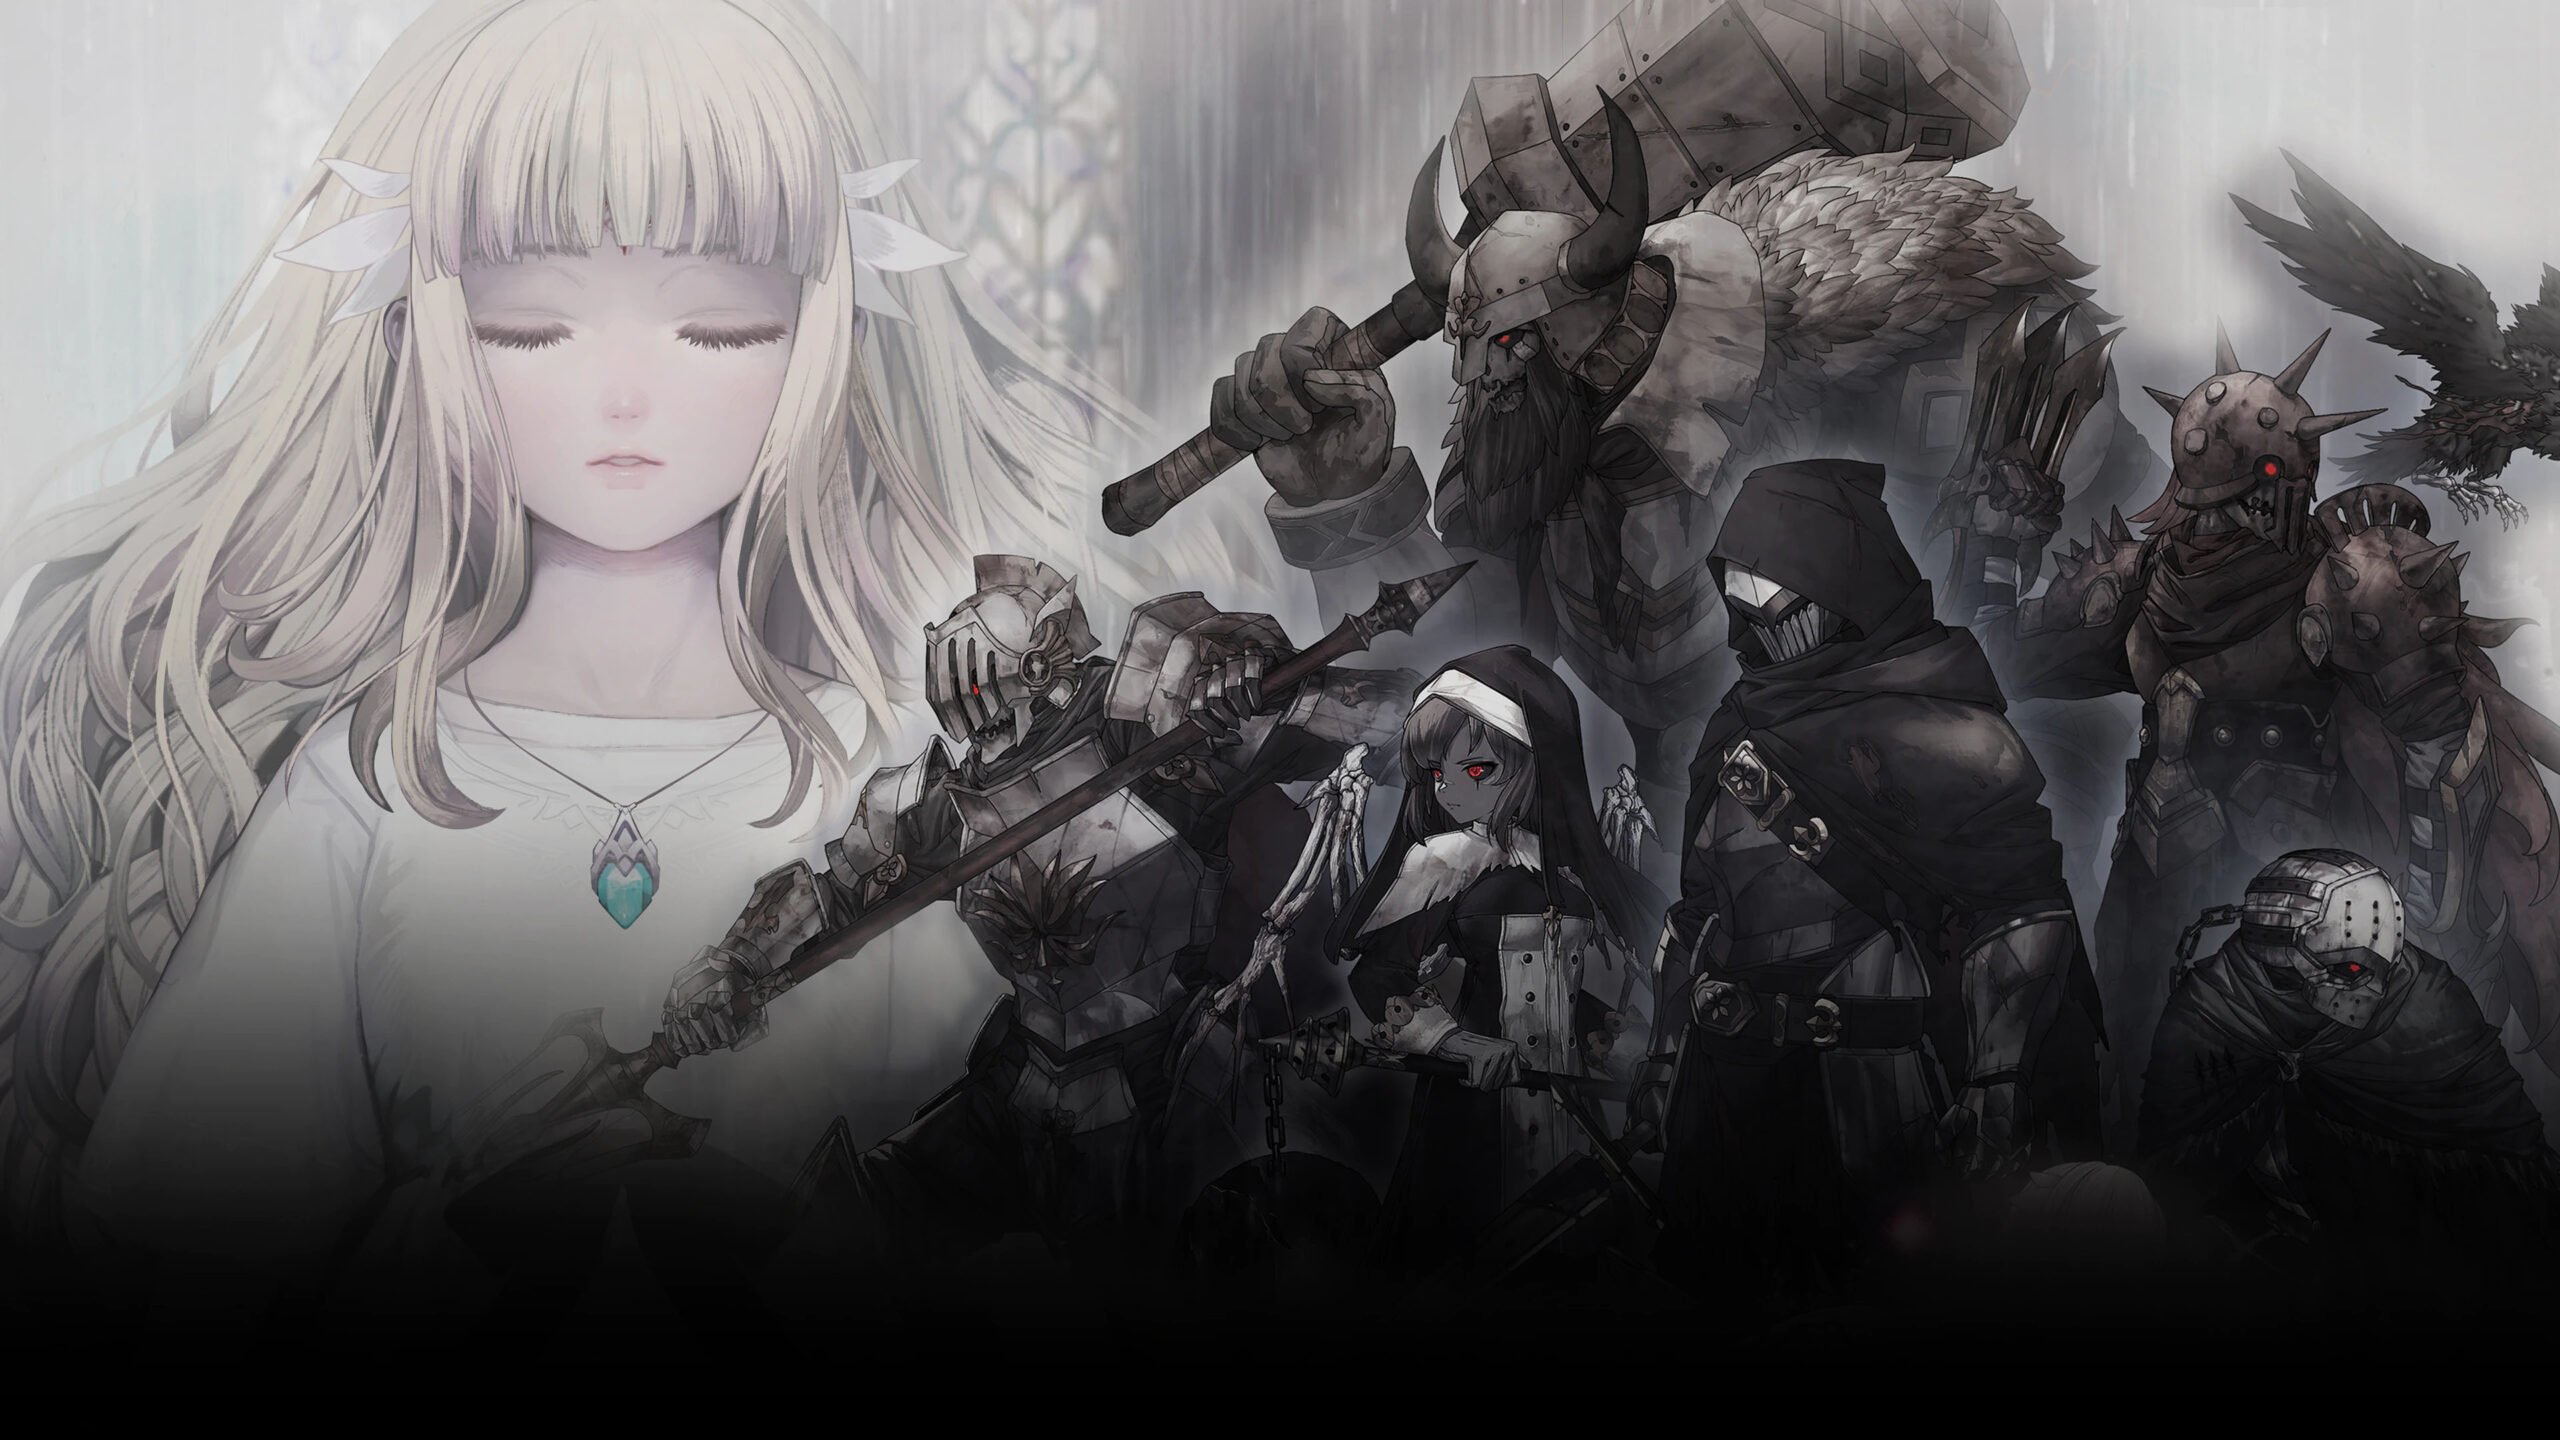 ENDER LILIES: Quietus of the Knights Journeys to Nintendo Switch on June  21st